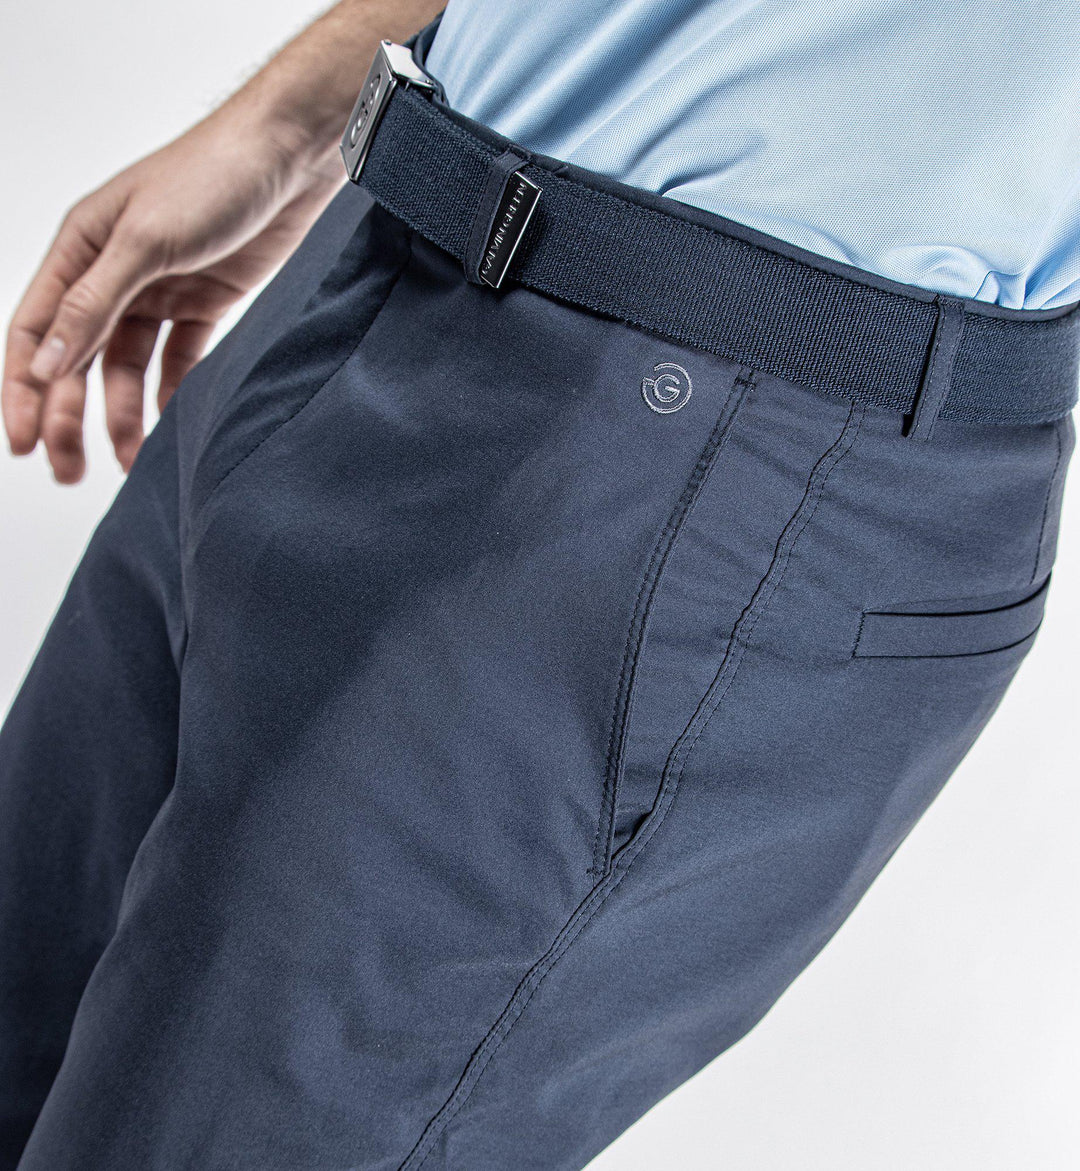 Noah is a Breathable golf pants for Men in the color Navy(4)